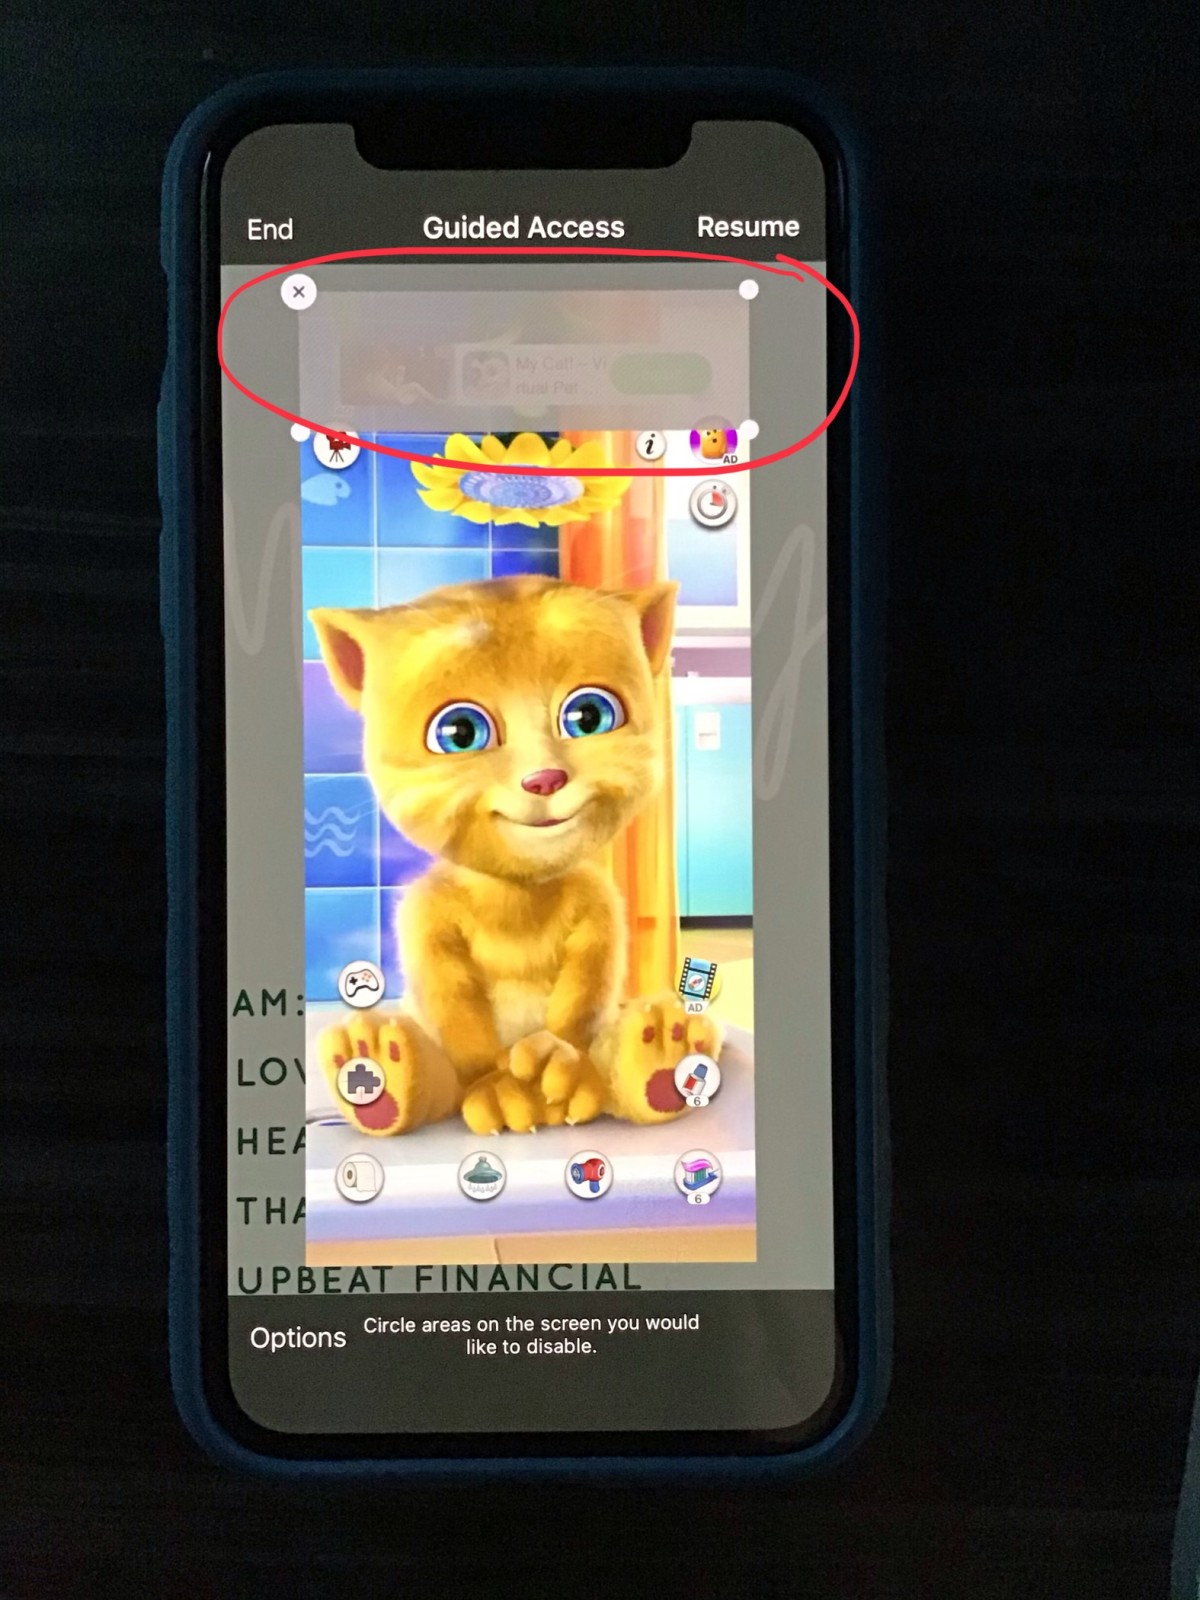 How to stop a child from clicking on ads in apps